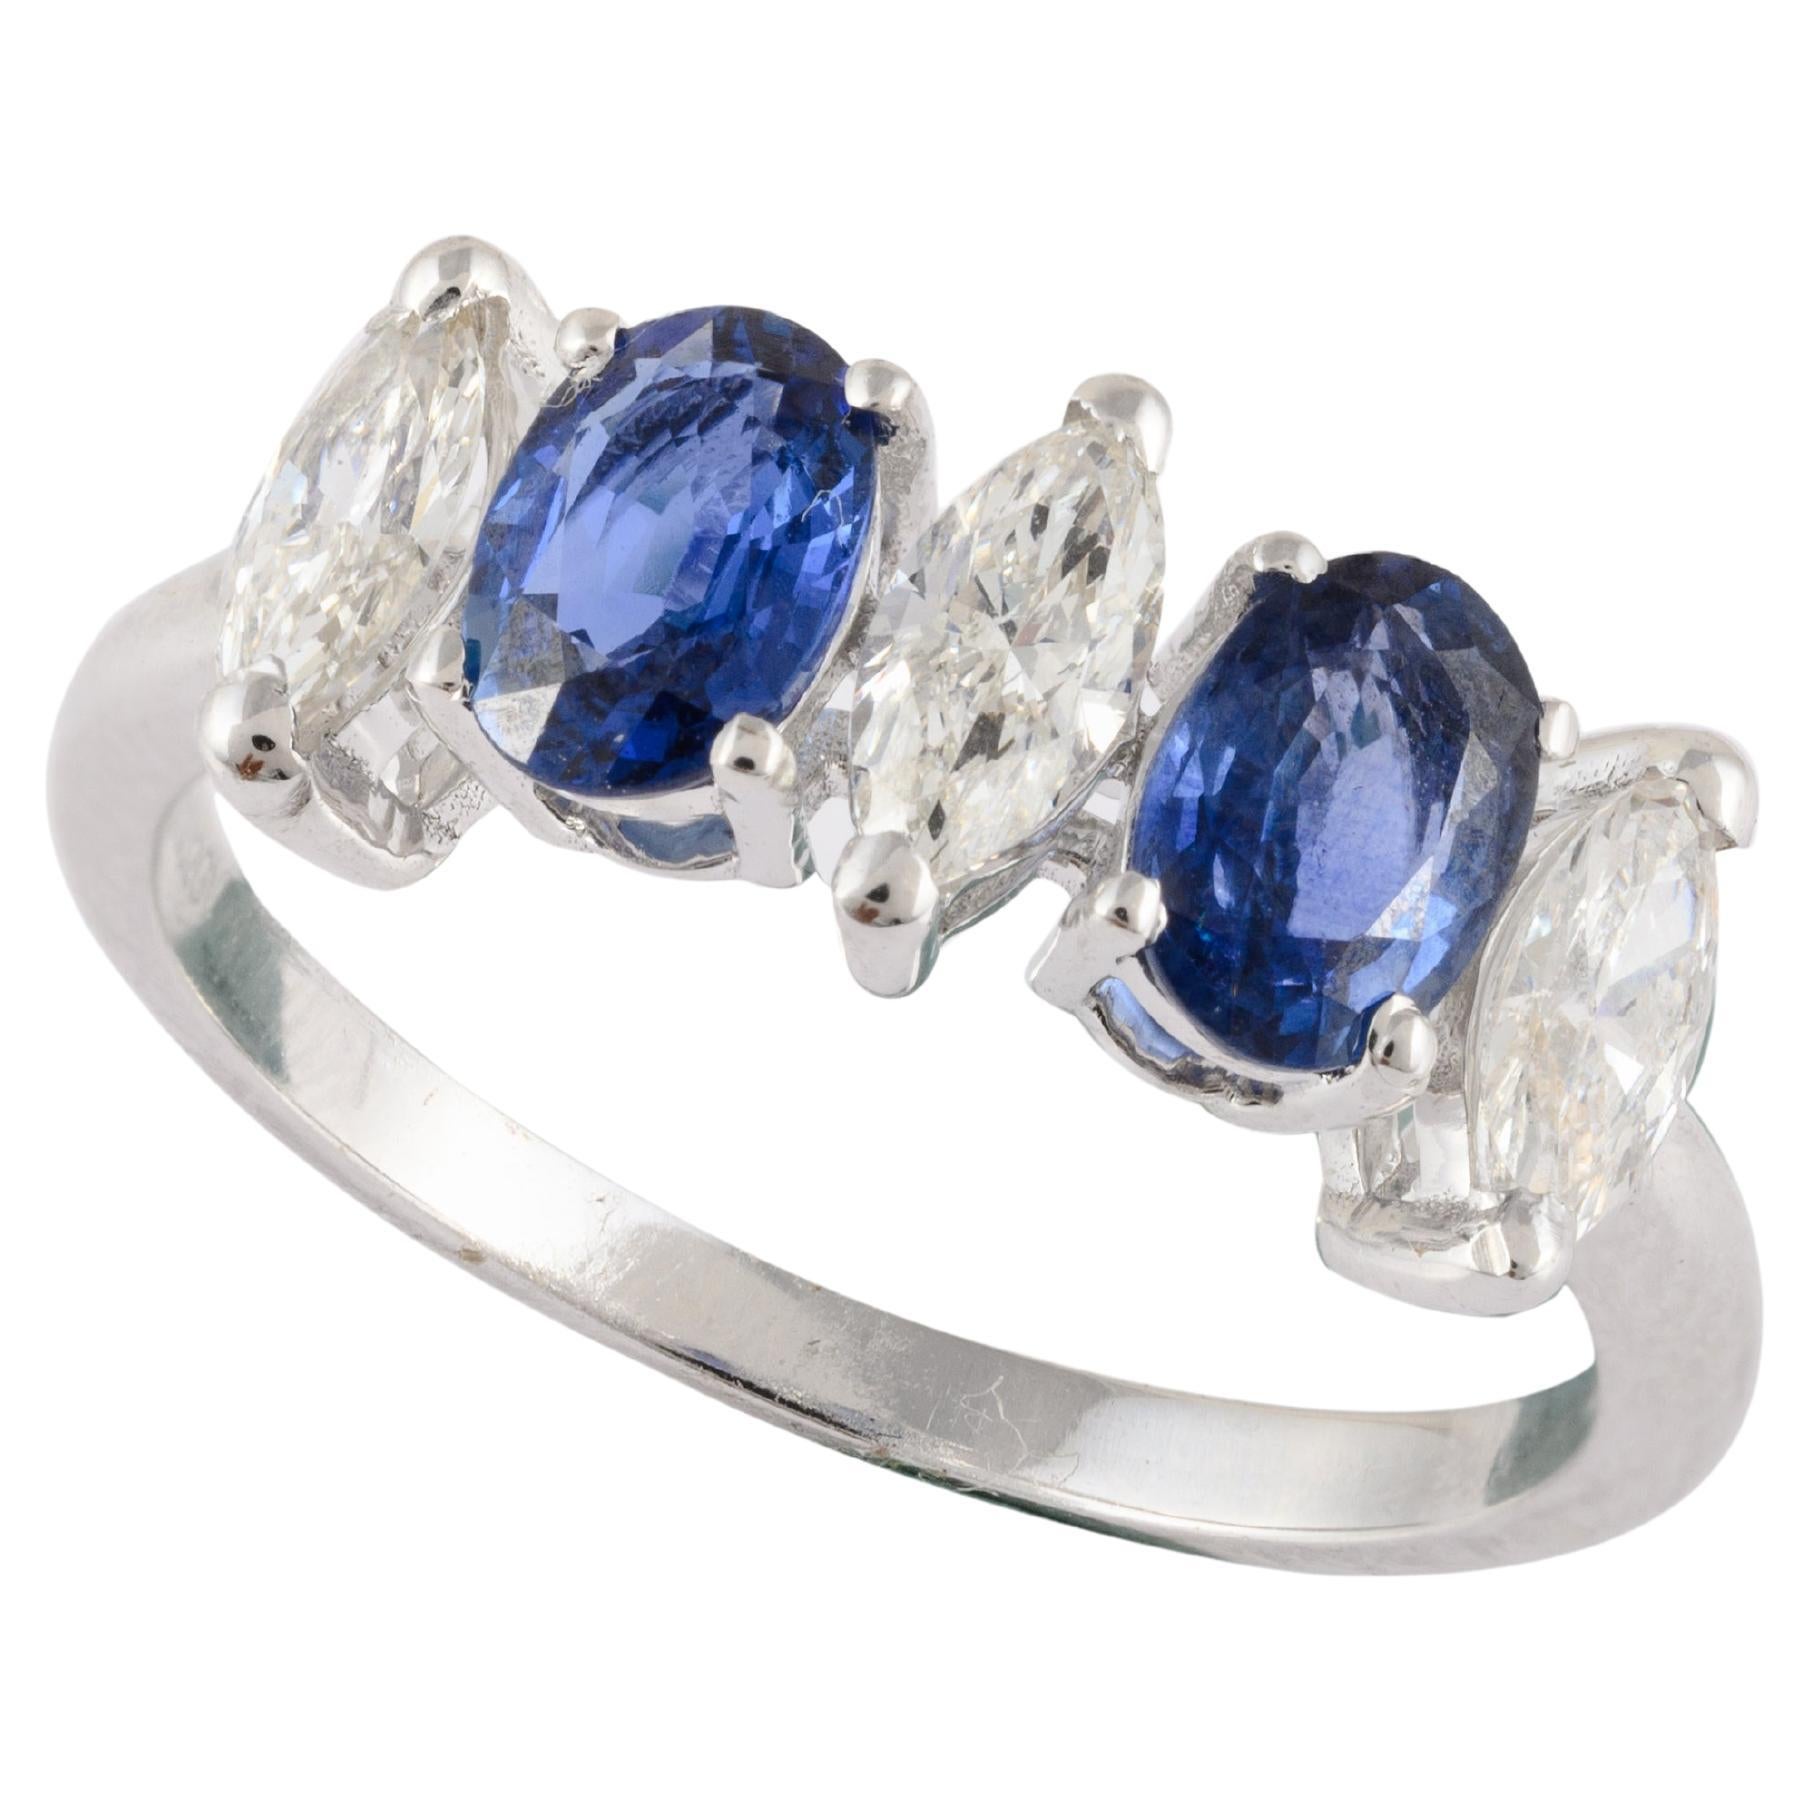 For Sale:  Stunning Diamond Blue Sapphire Engagement Ring For Her in Solid 18kt White Gold